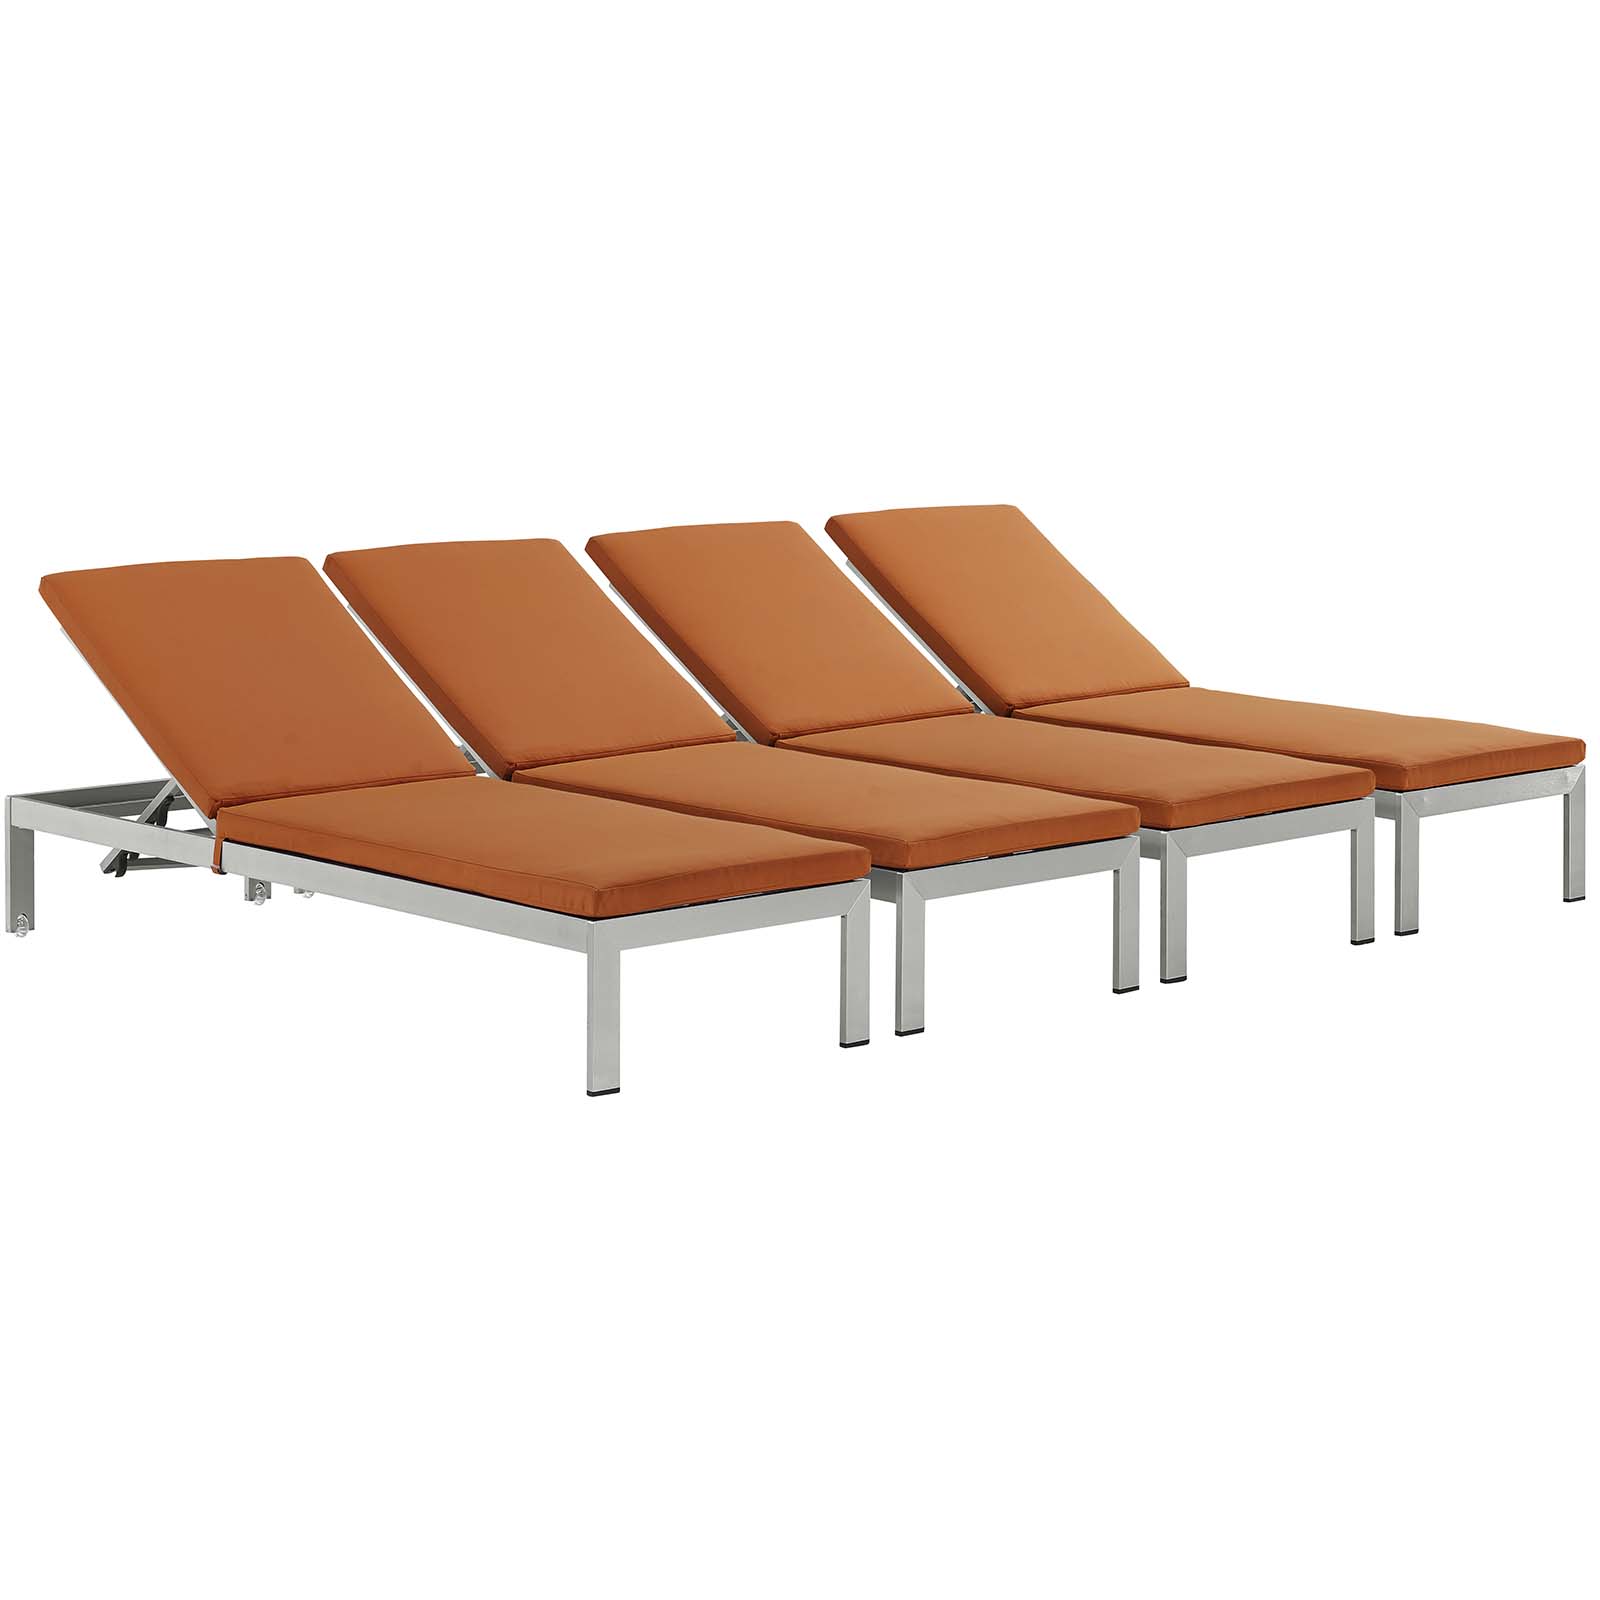 Modern Contemporary Urban Design Outdoor Patio Balcony Chaise Lounge Chair ( Set of 4), Orange, Aluminum - image 1 of 6